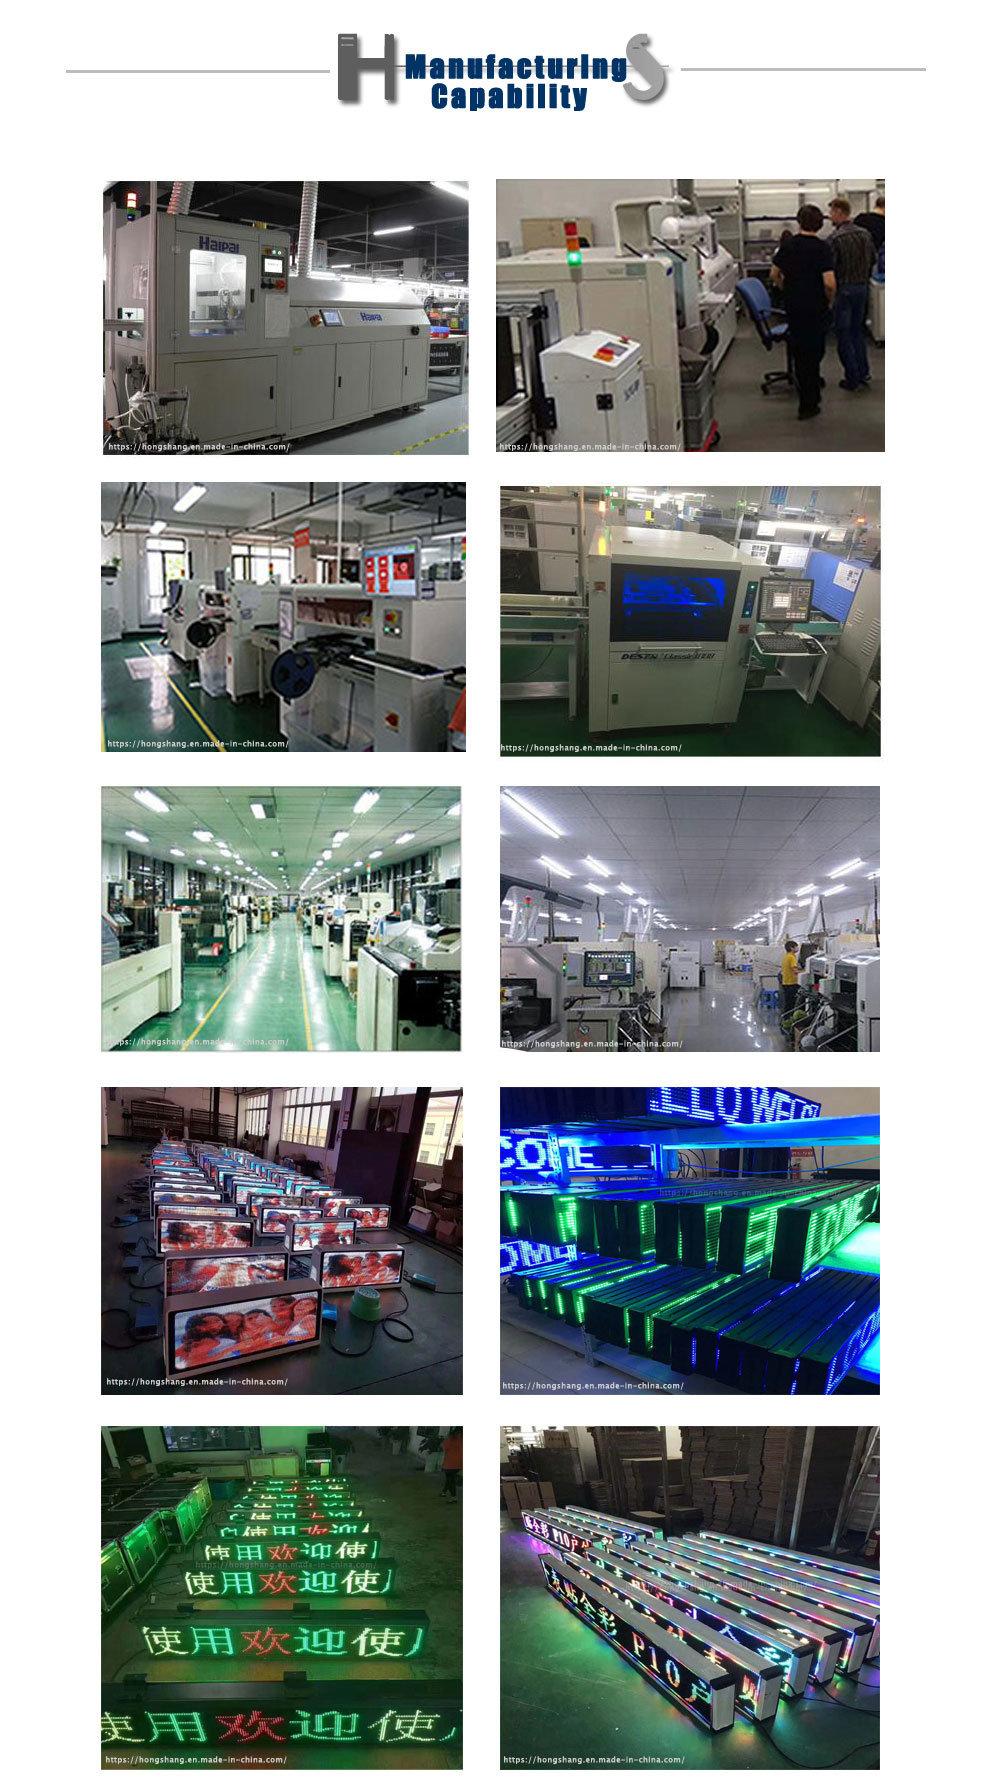 Semi-Outdoor Display Shop to Promote LED Sign Board